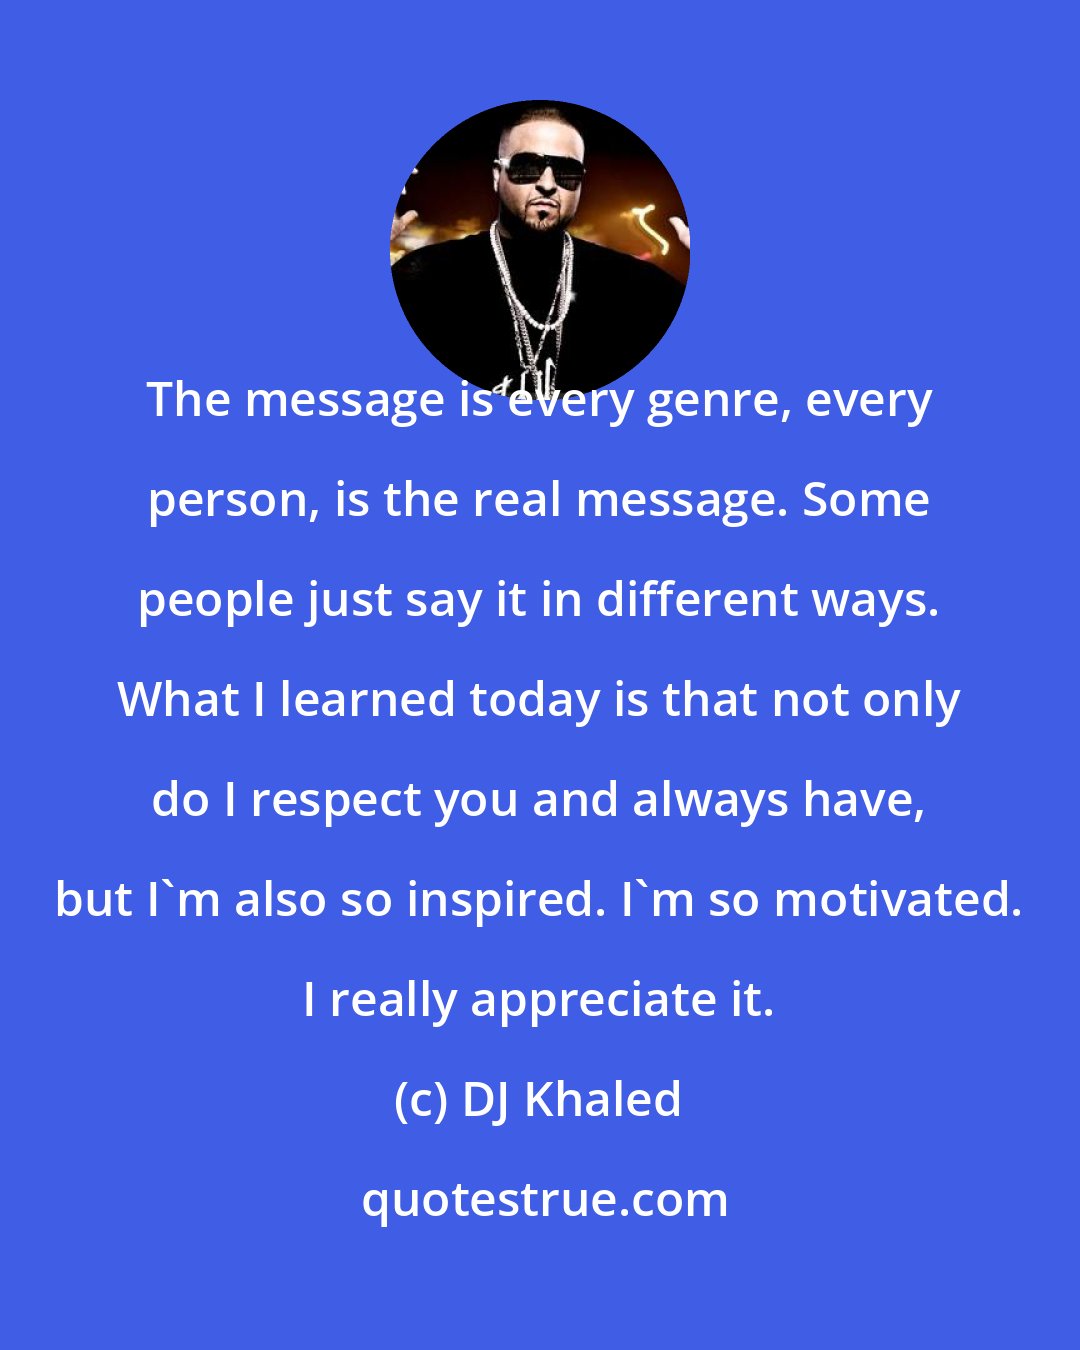 DJ Khaled: The message is every genre, every person, is the real message. Some people just say it in different ways. What I learned today is that not only do I respect you and always have, but I'm also so inspired. I'm so motivated. I really appreciate it.